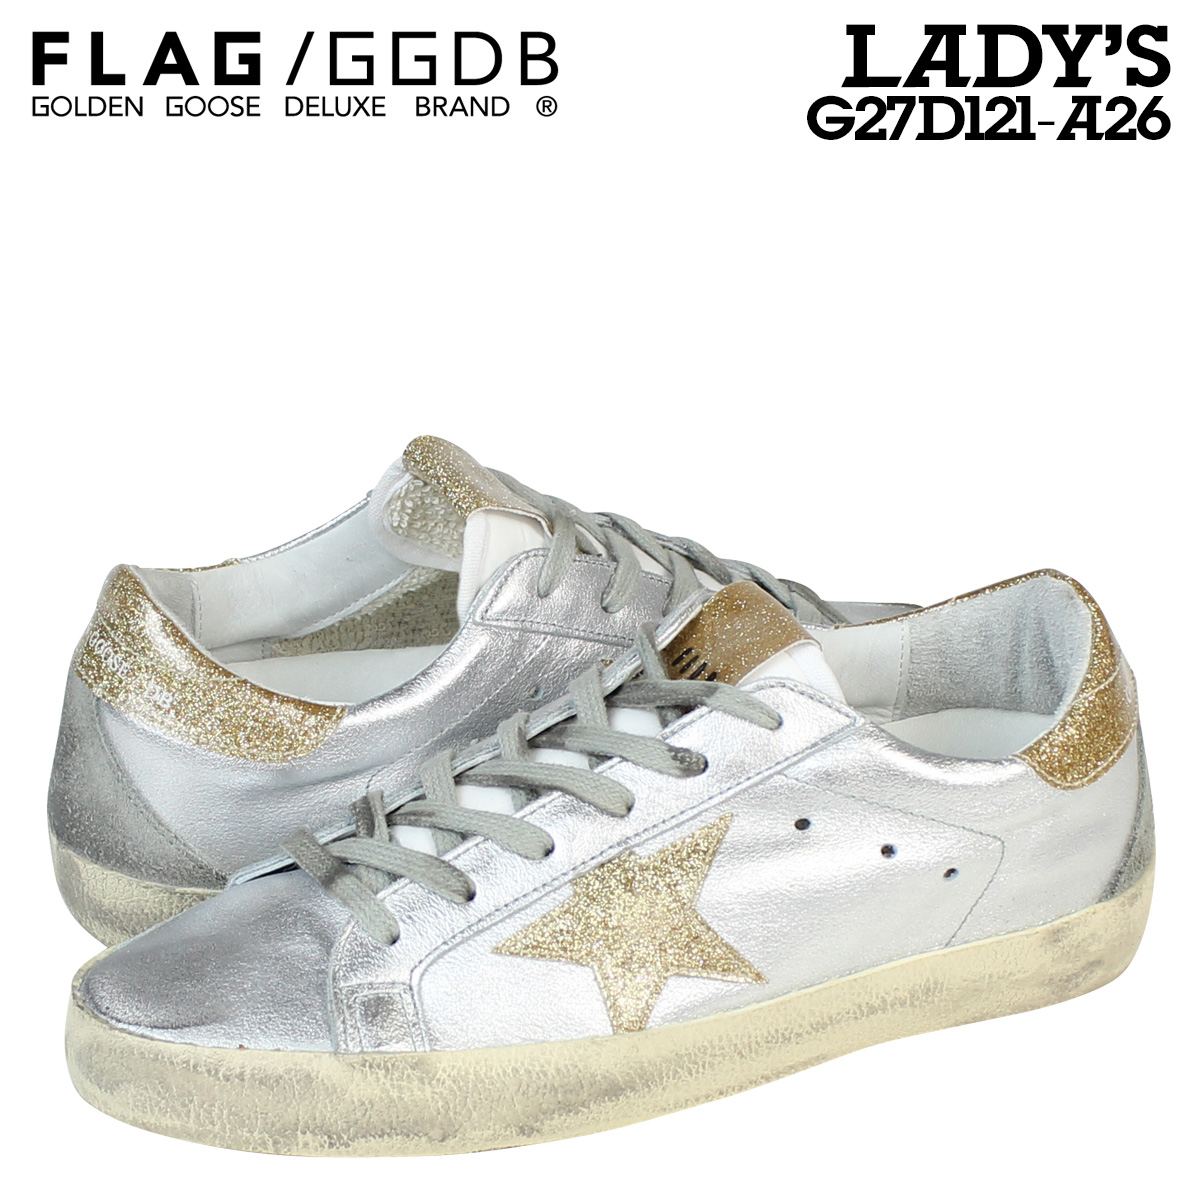 gold and silver golden goose